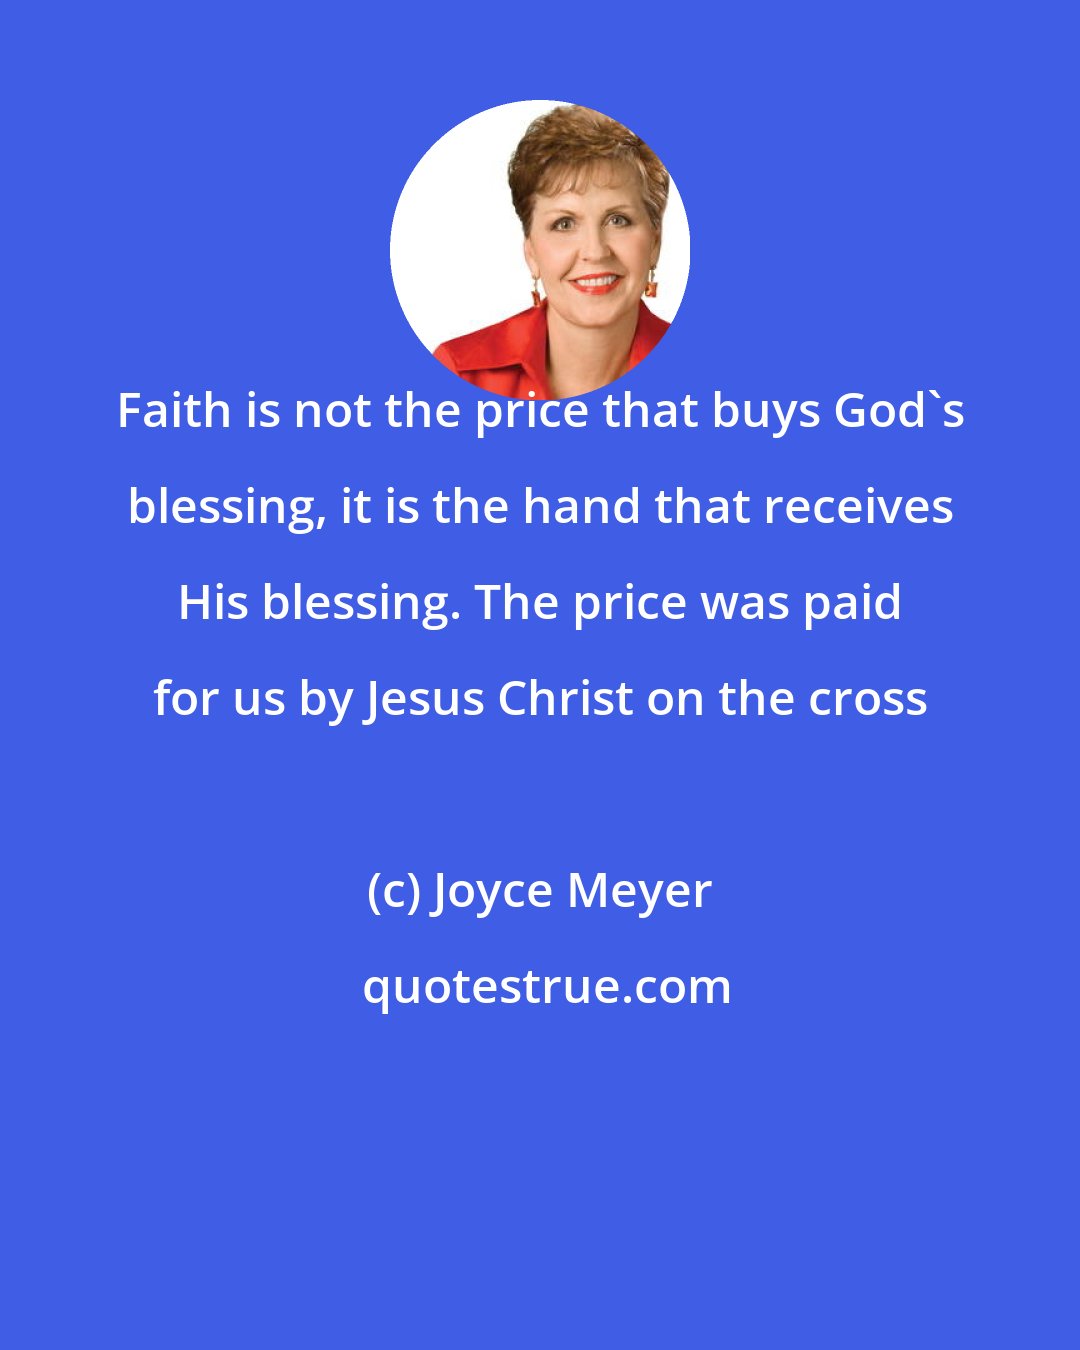 Joyce Meyer: Faith is not the price that buys God's blessing, it is the hand that receives His blessing. The price was paid for us by Jesus Christ on the cross